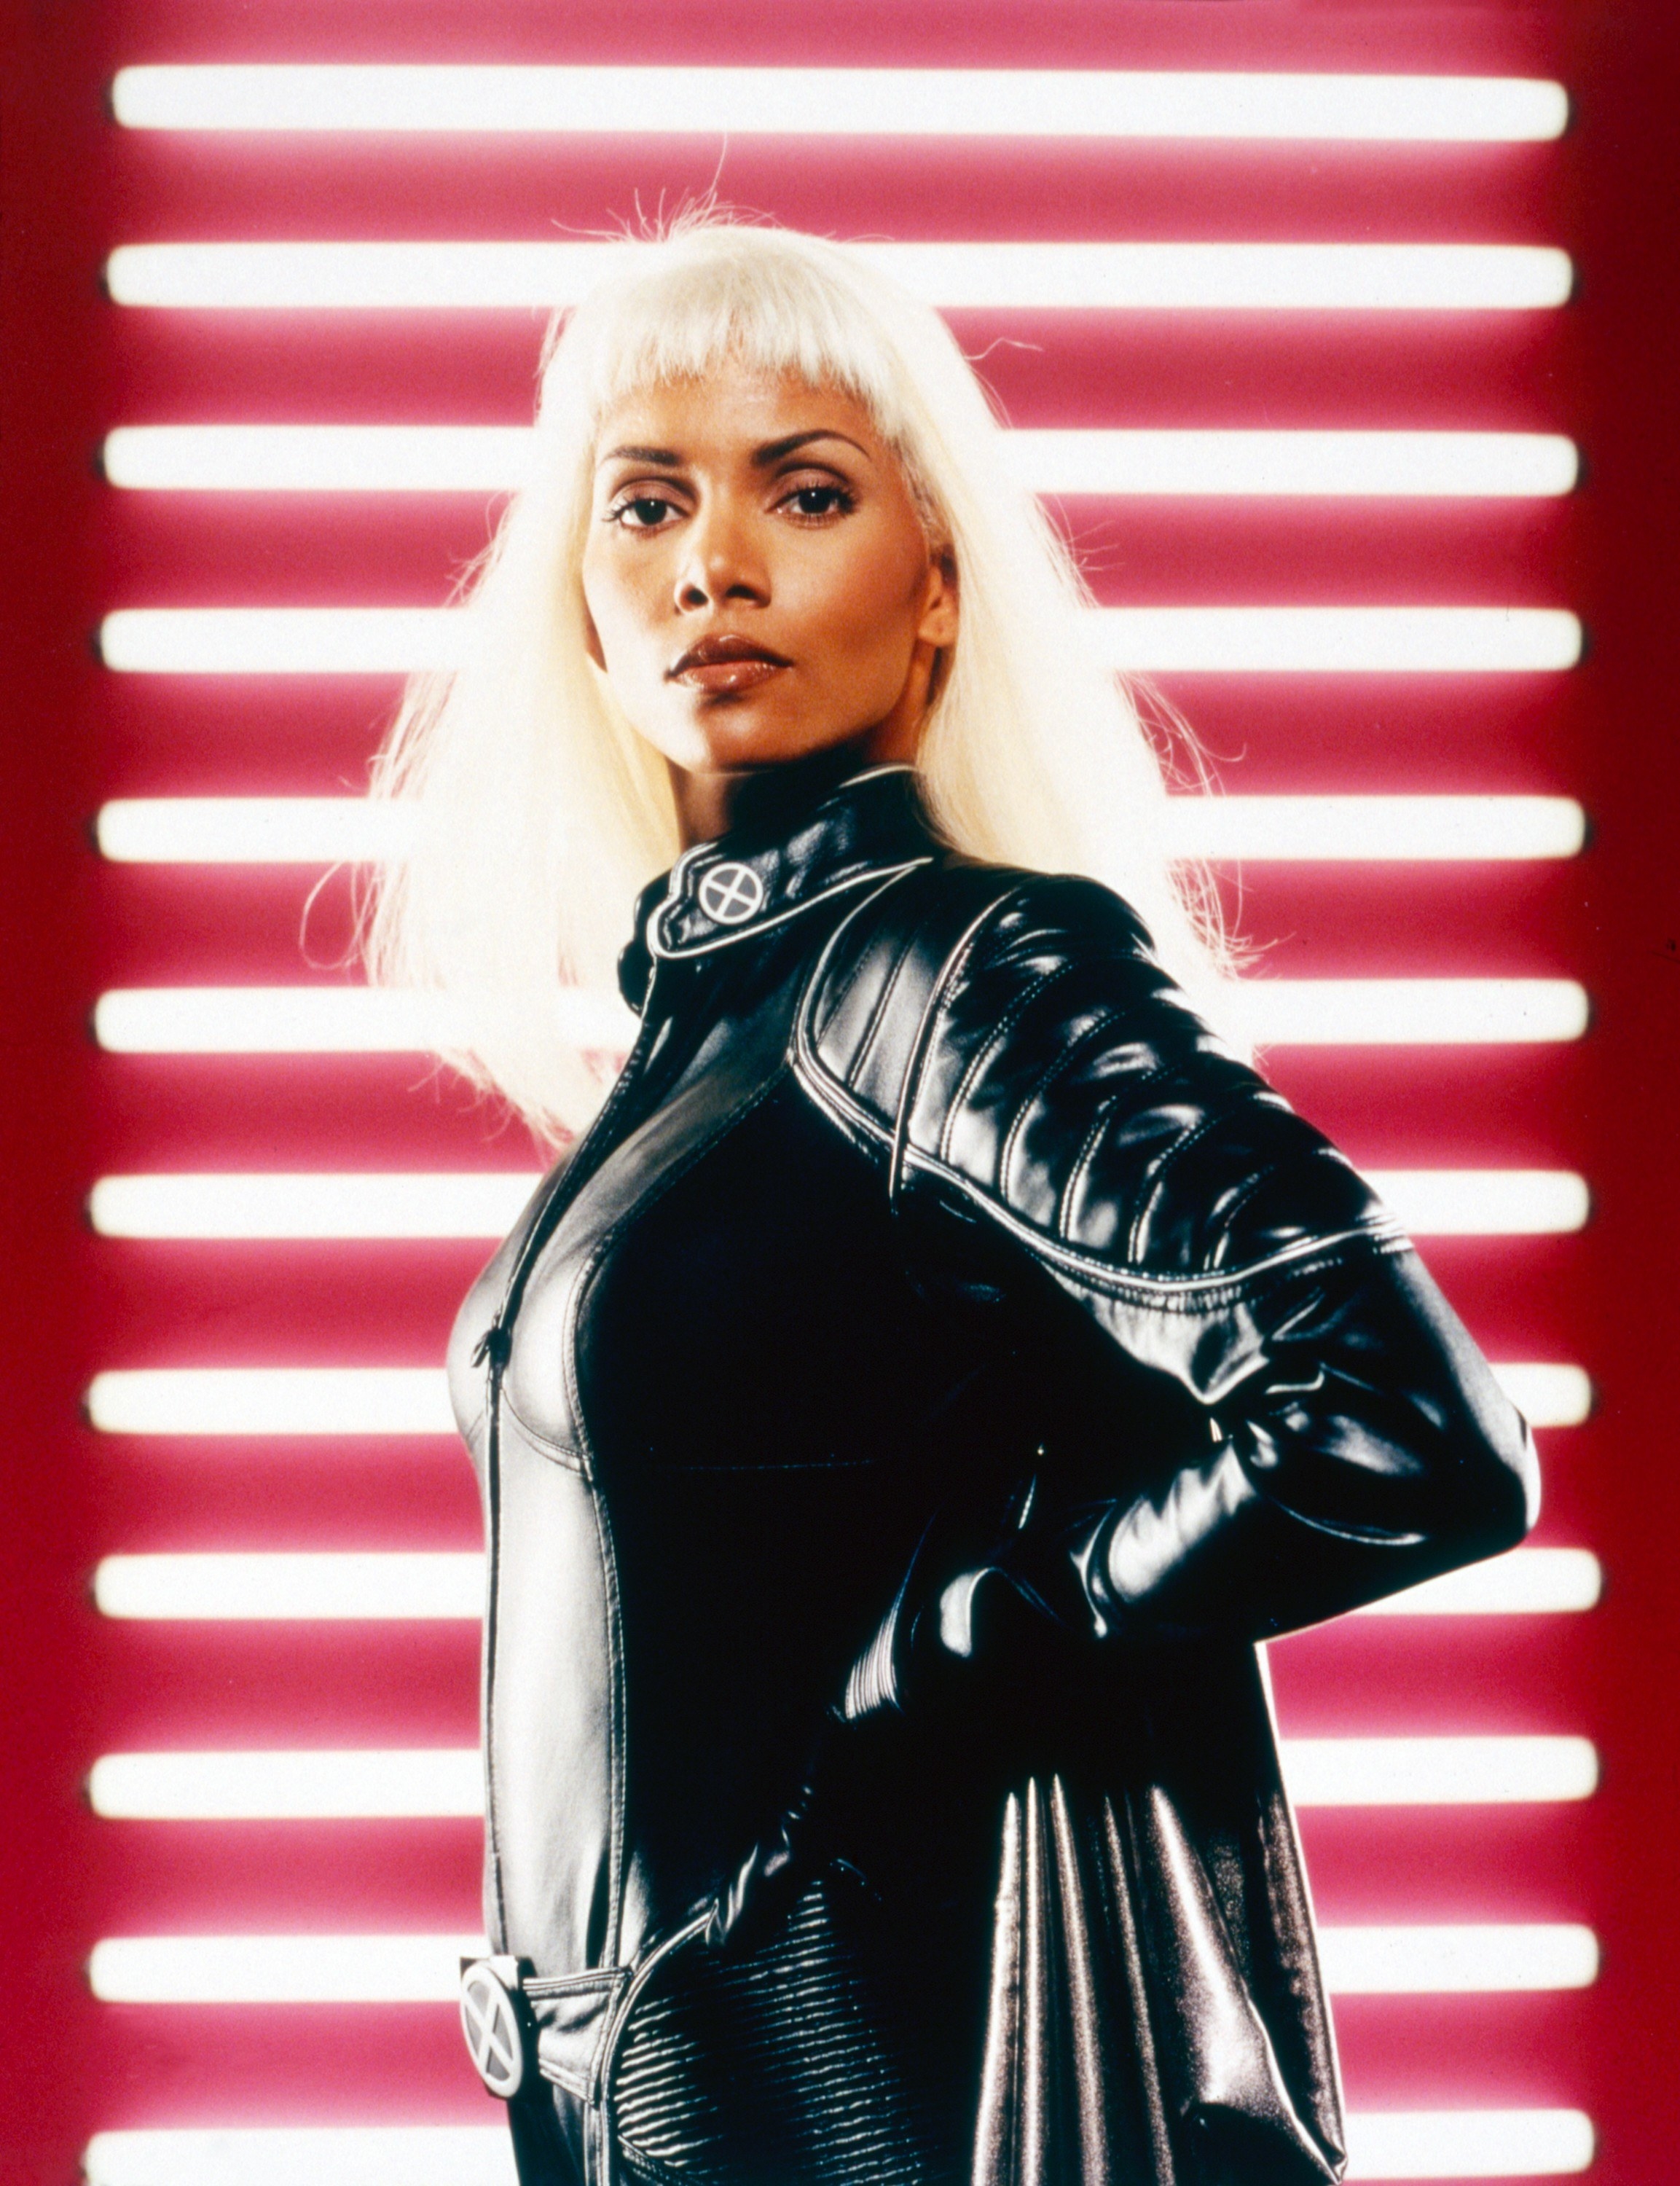 Halle as Storm with long blonde hair with bangs and wearing a leather superhero suit with cape